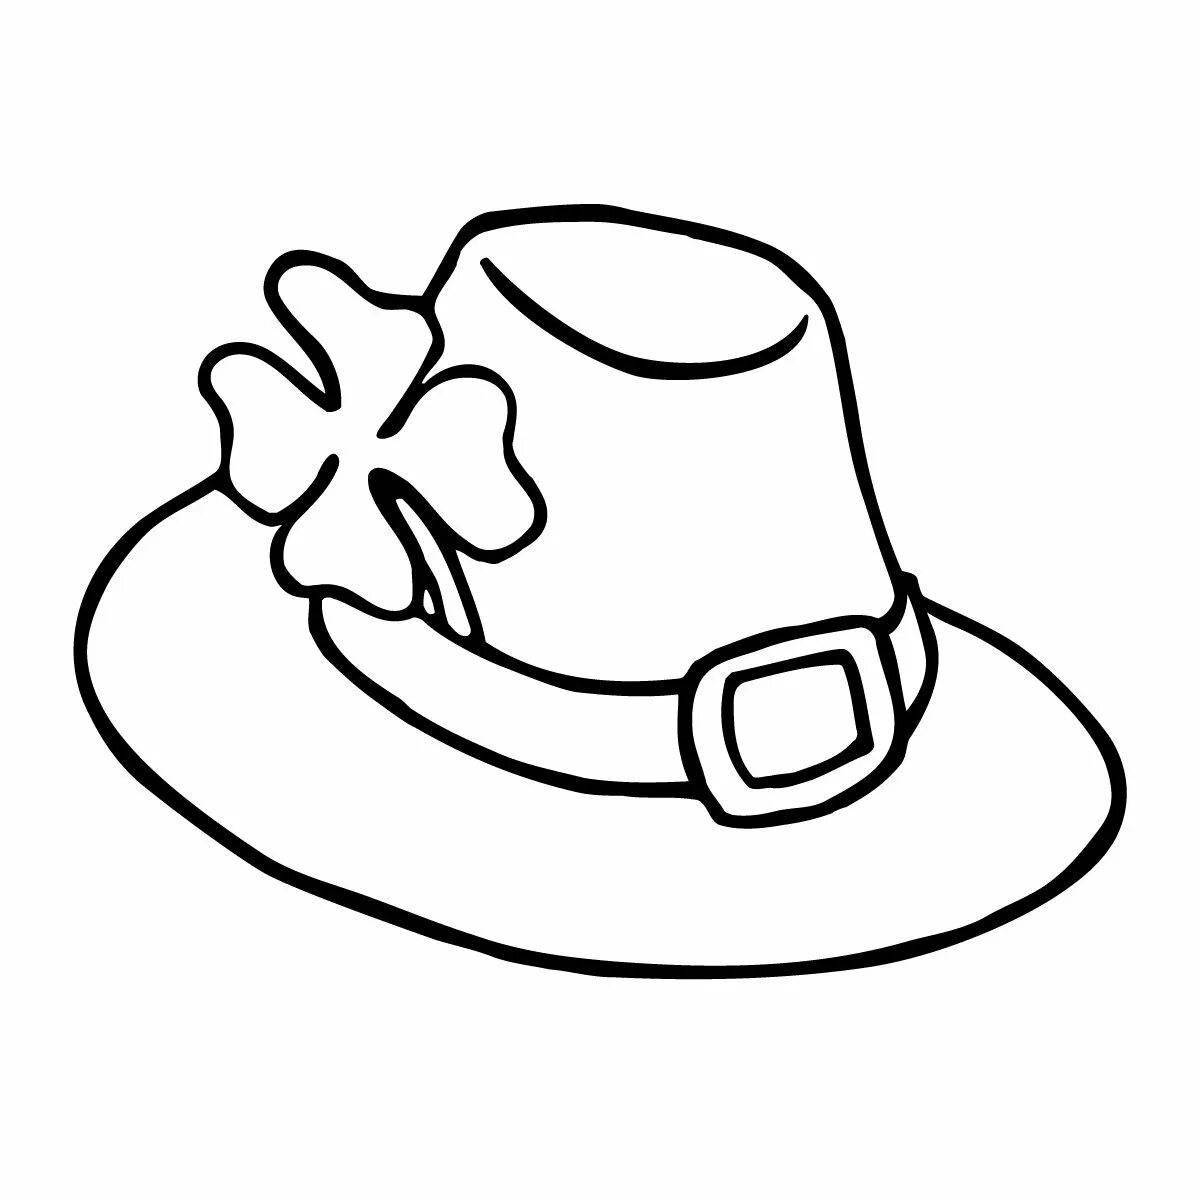 Great living hat drawing